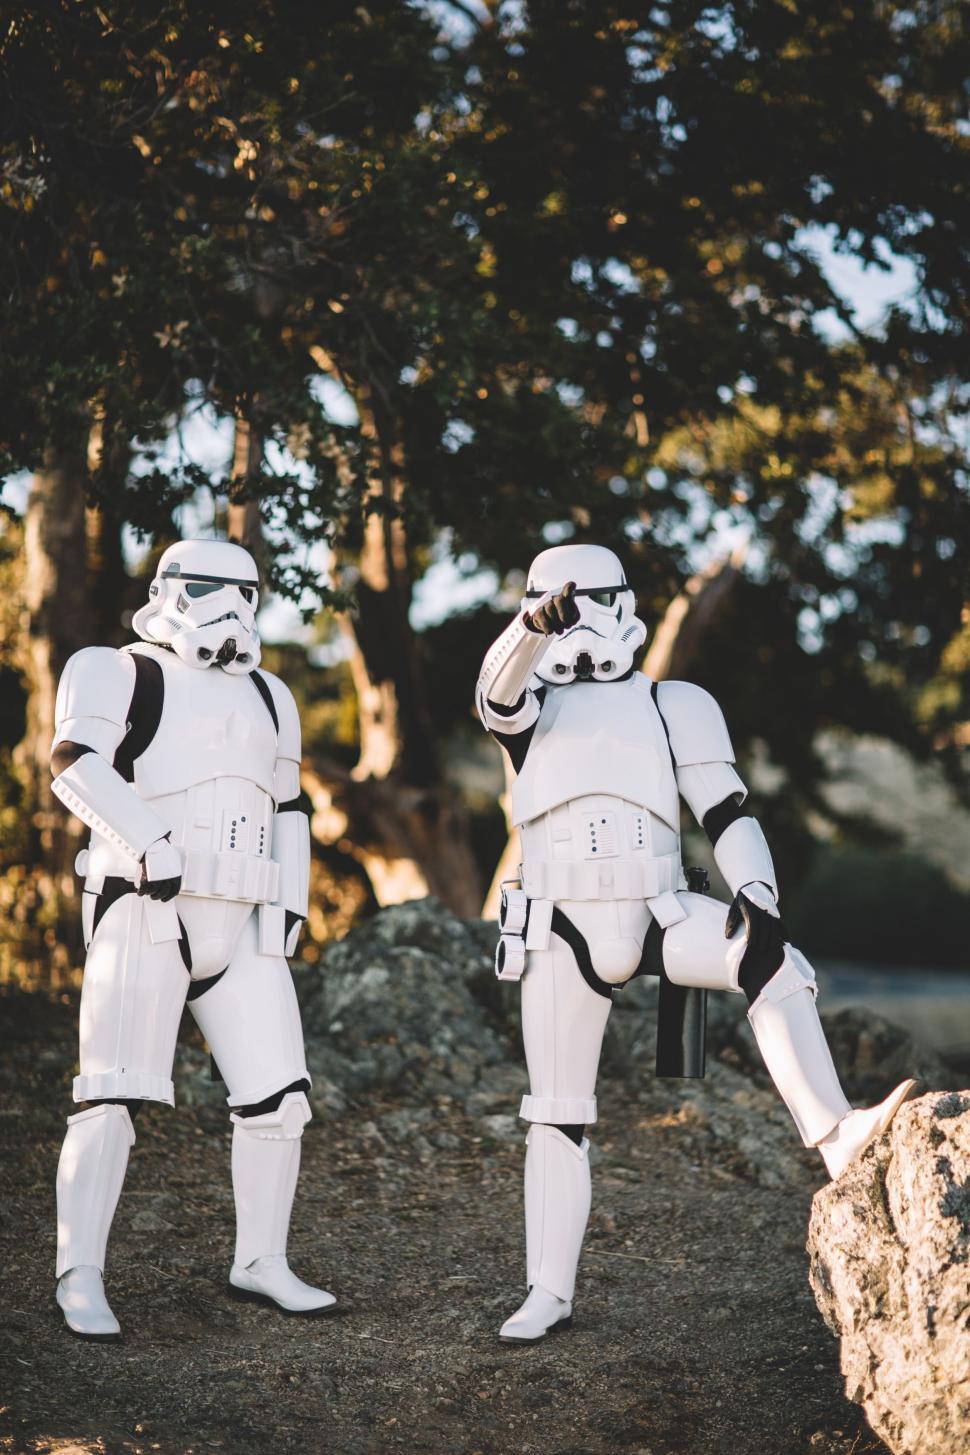 Free Image of Stormtroopers standing in the forest  